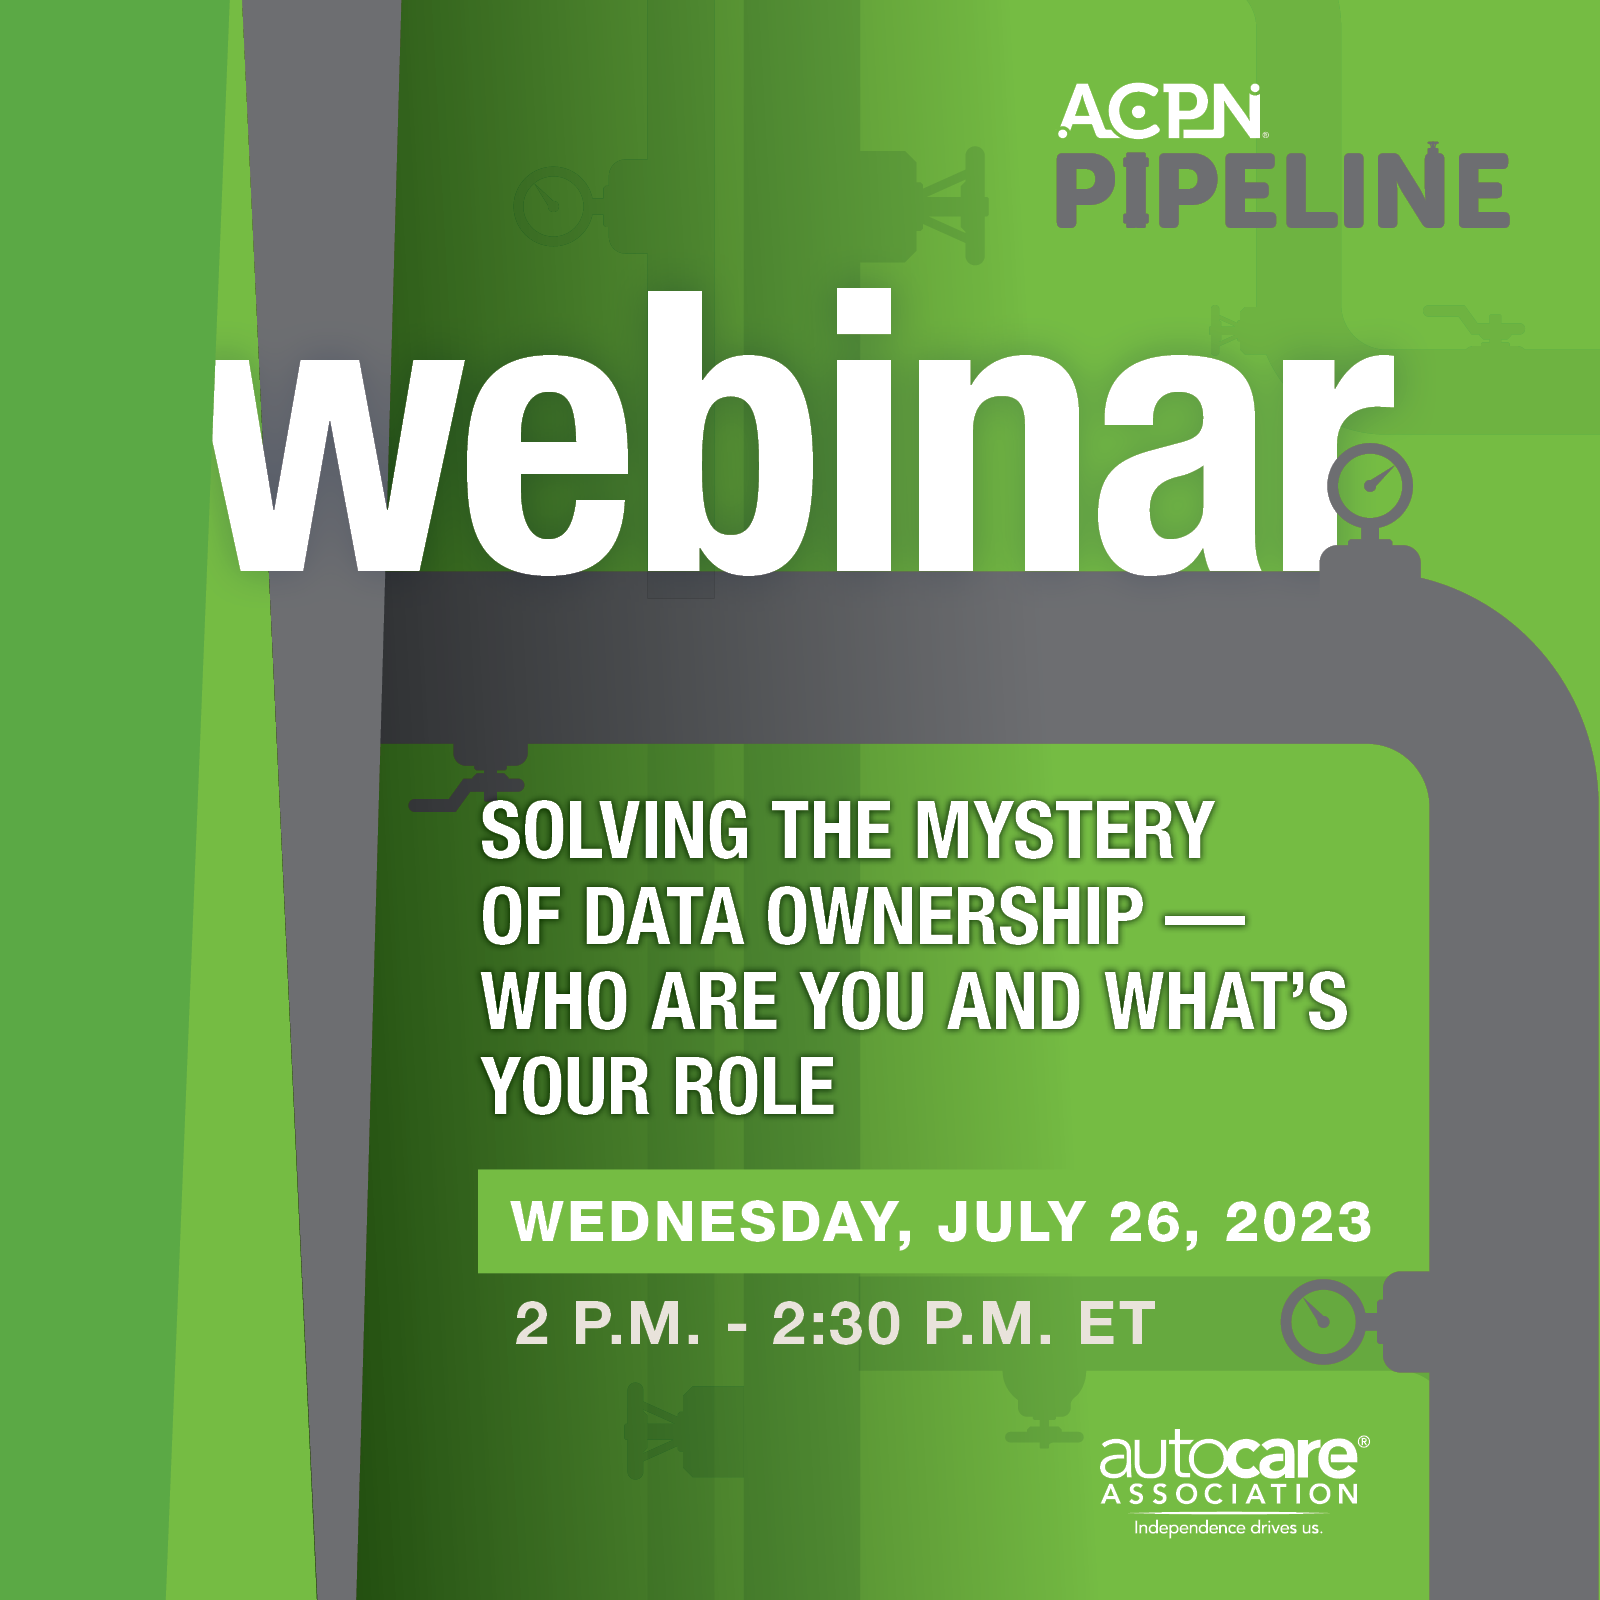 Image of ACPN Pipeline webinar on July 26th about data ownership